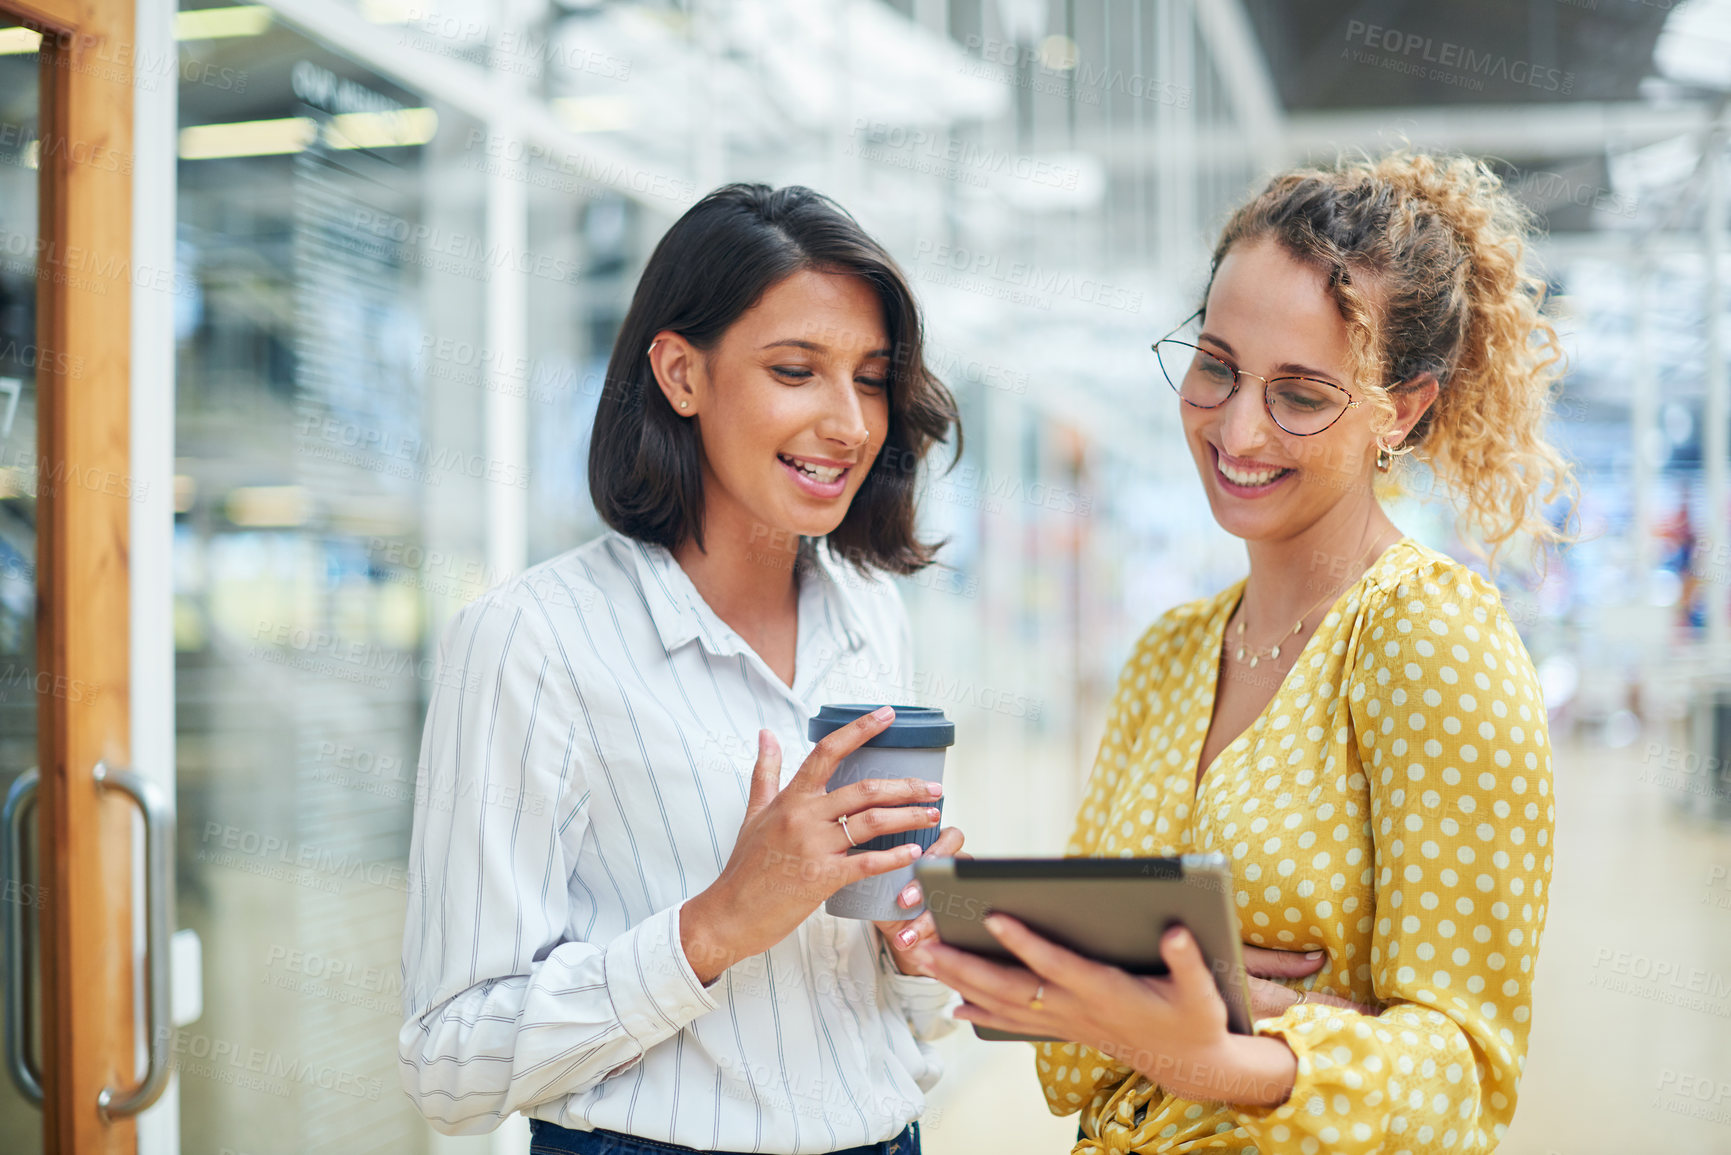 Buy stock photo Shot of two young businesswomen using a digital tablet in a modern office